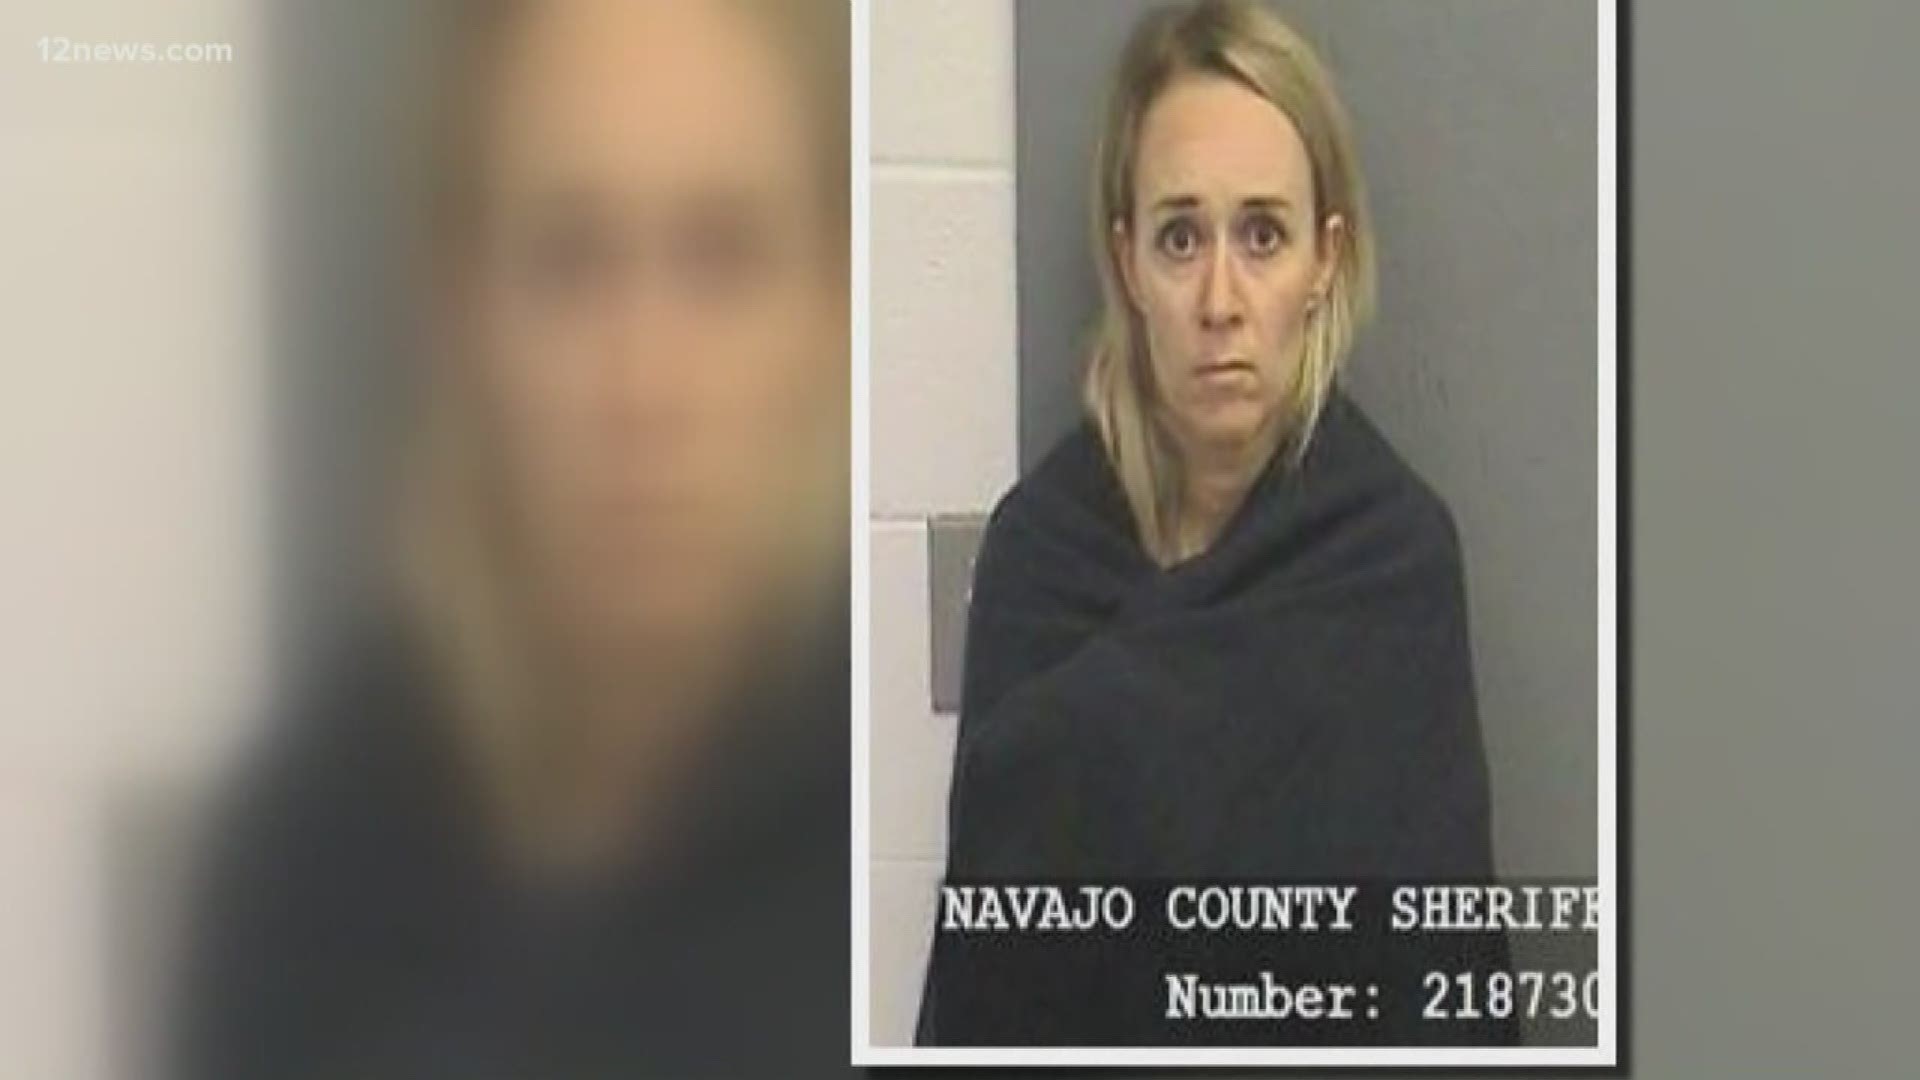 After a six-week investigation, the teacher was arrested and booked into the Navajo County Jail in Holbrook.